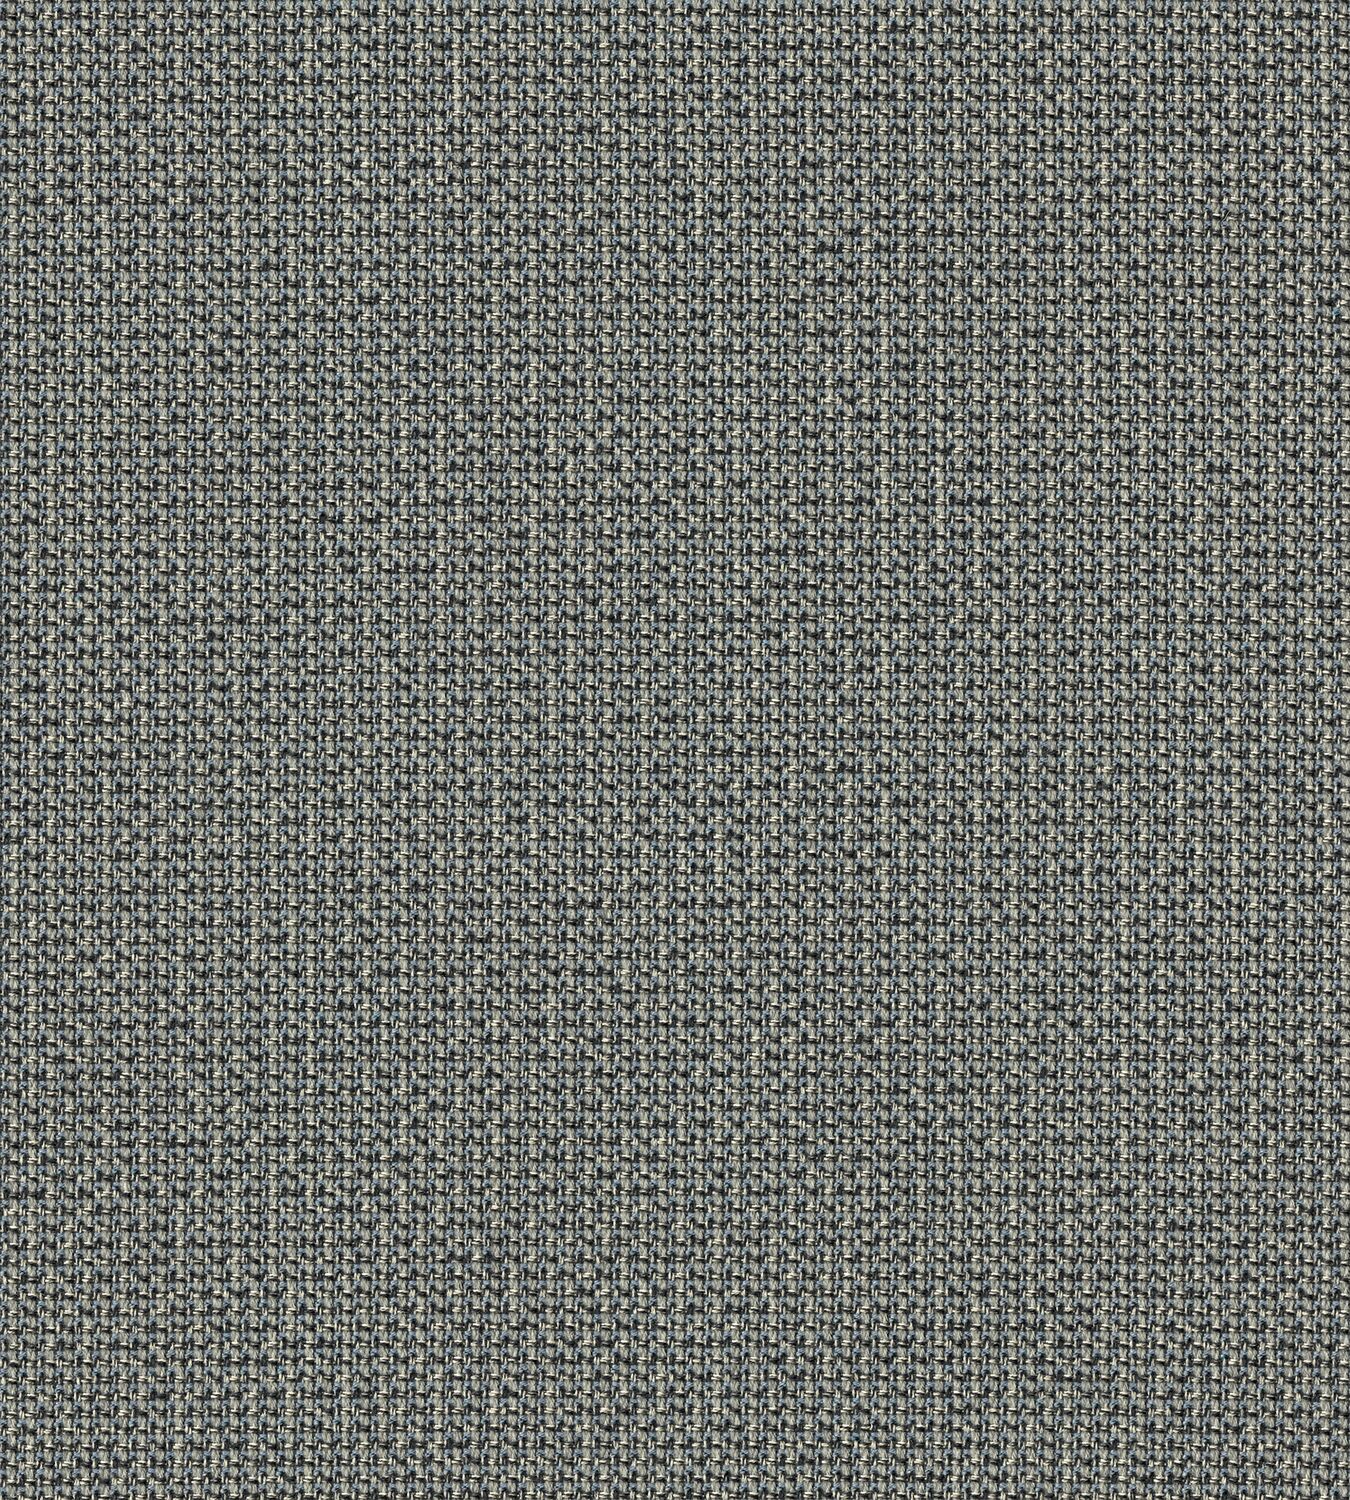 Barberpole Basket - Double Helix - 4114 - 03 Tileable Swatches